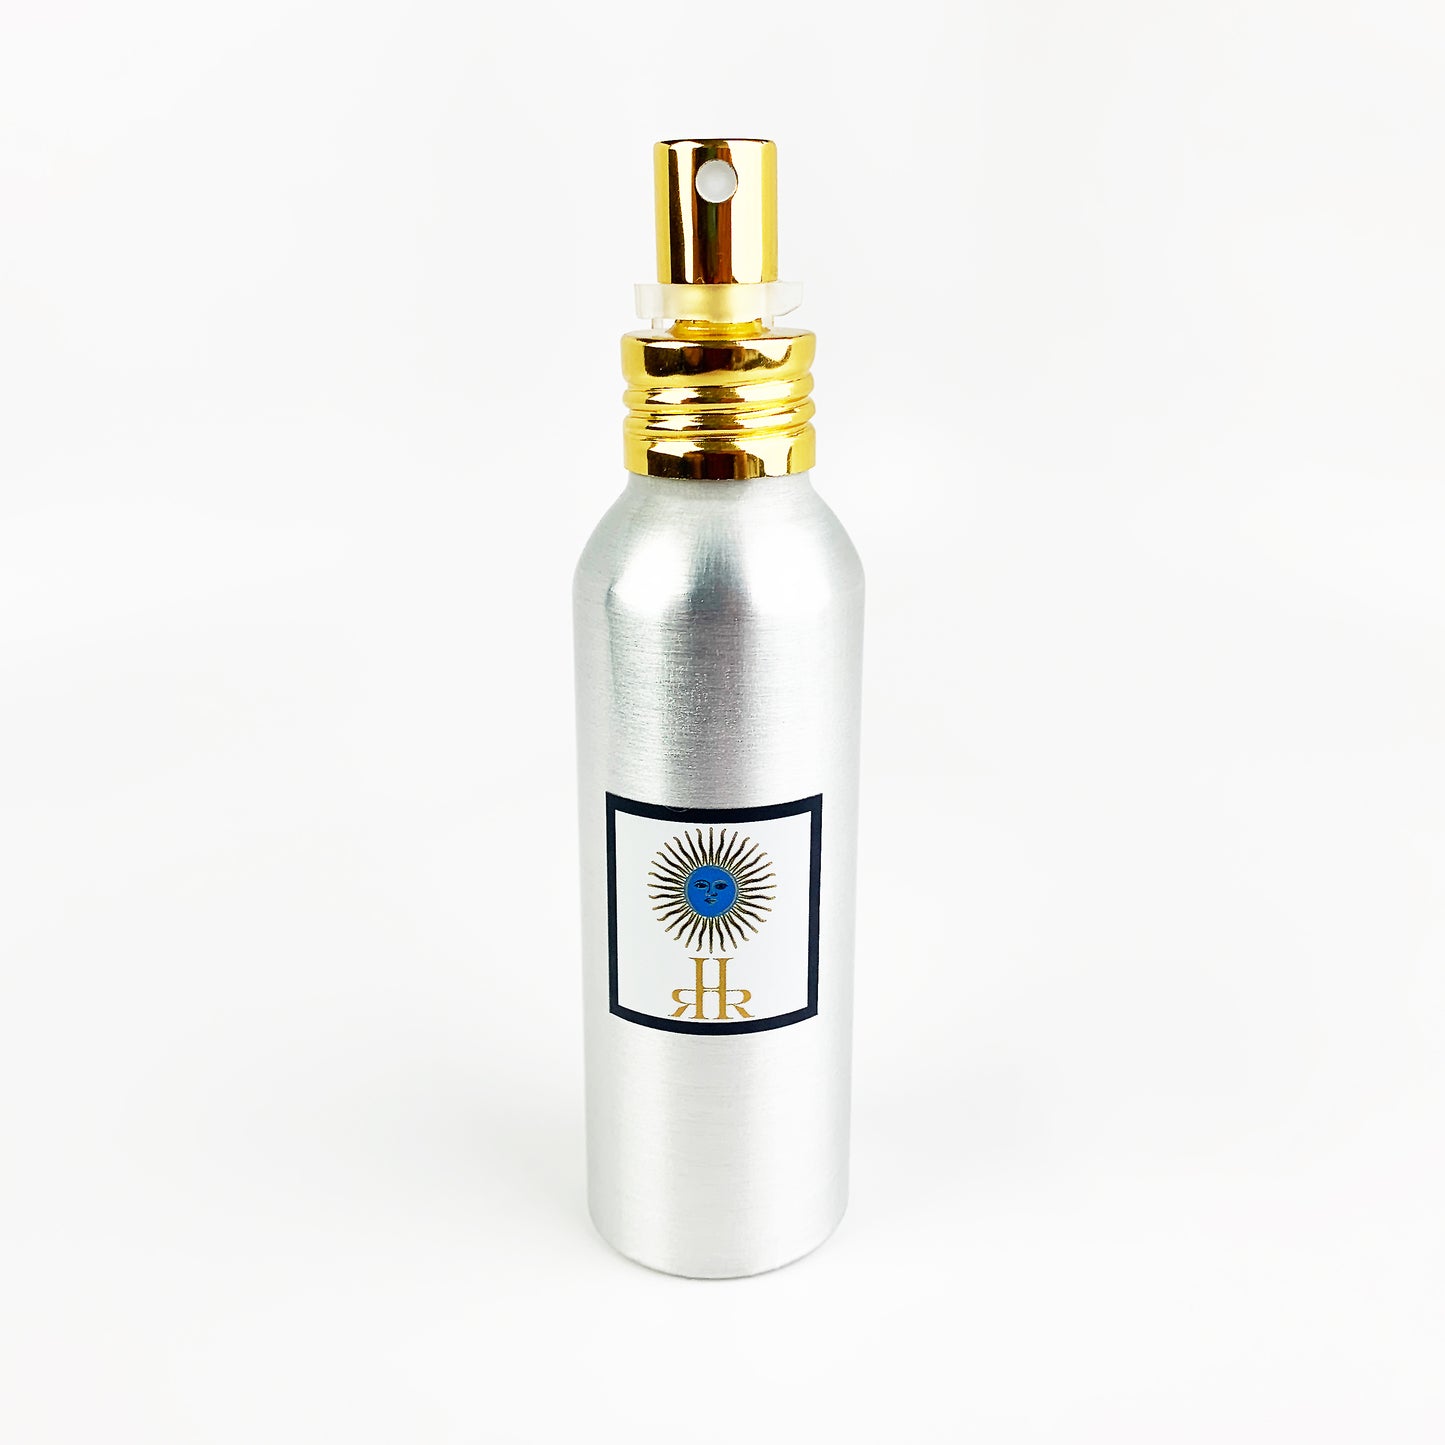 Amber Blue Travel Room Spray in 50 mL and in 100 mL Sizes - RHR Luxury Home Fragrance